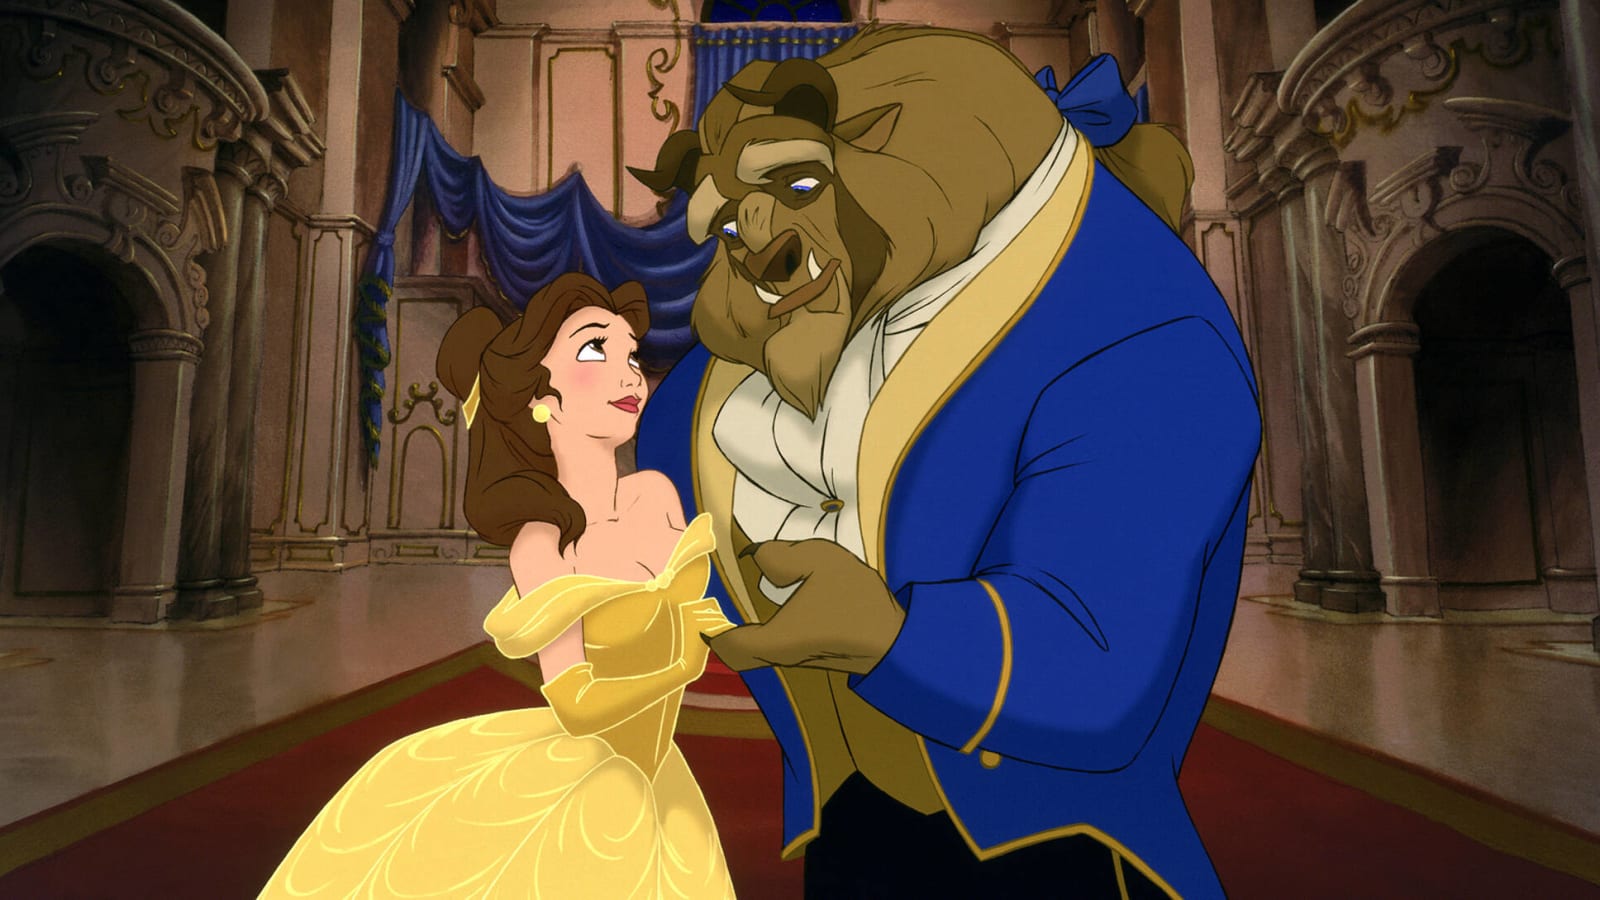 20 facts you might not know about 'Beauty and the Beast'